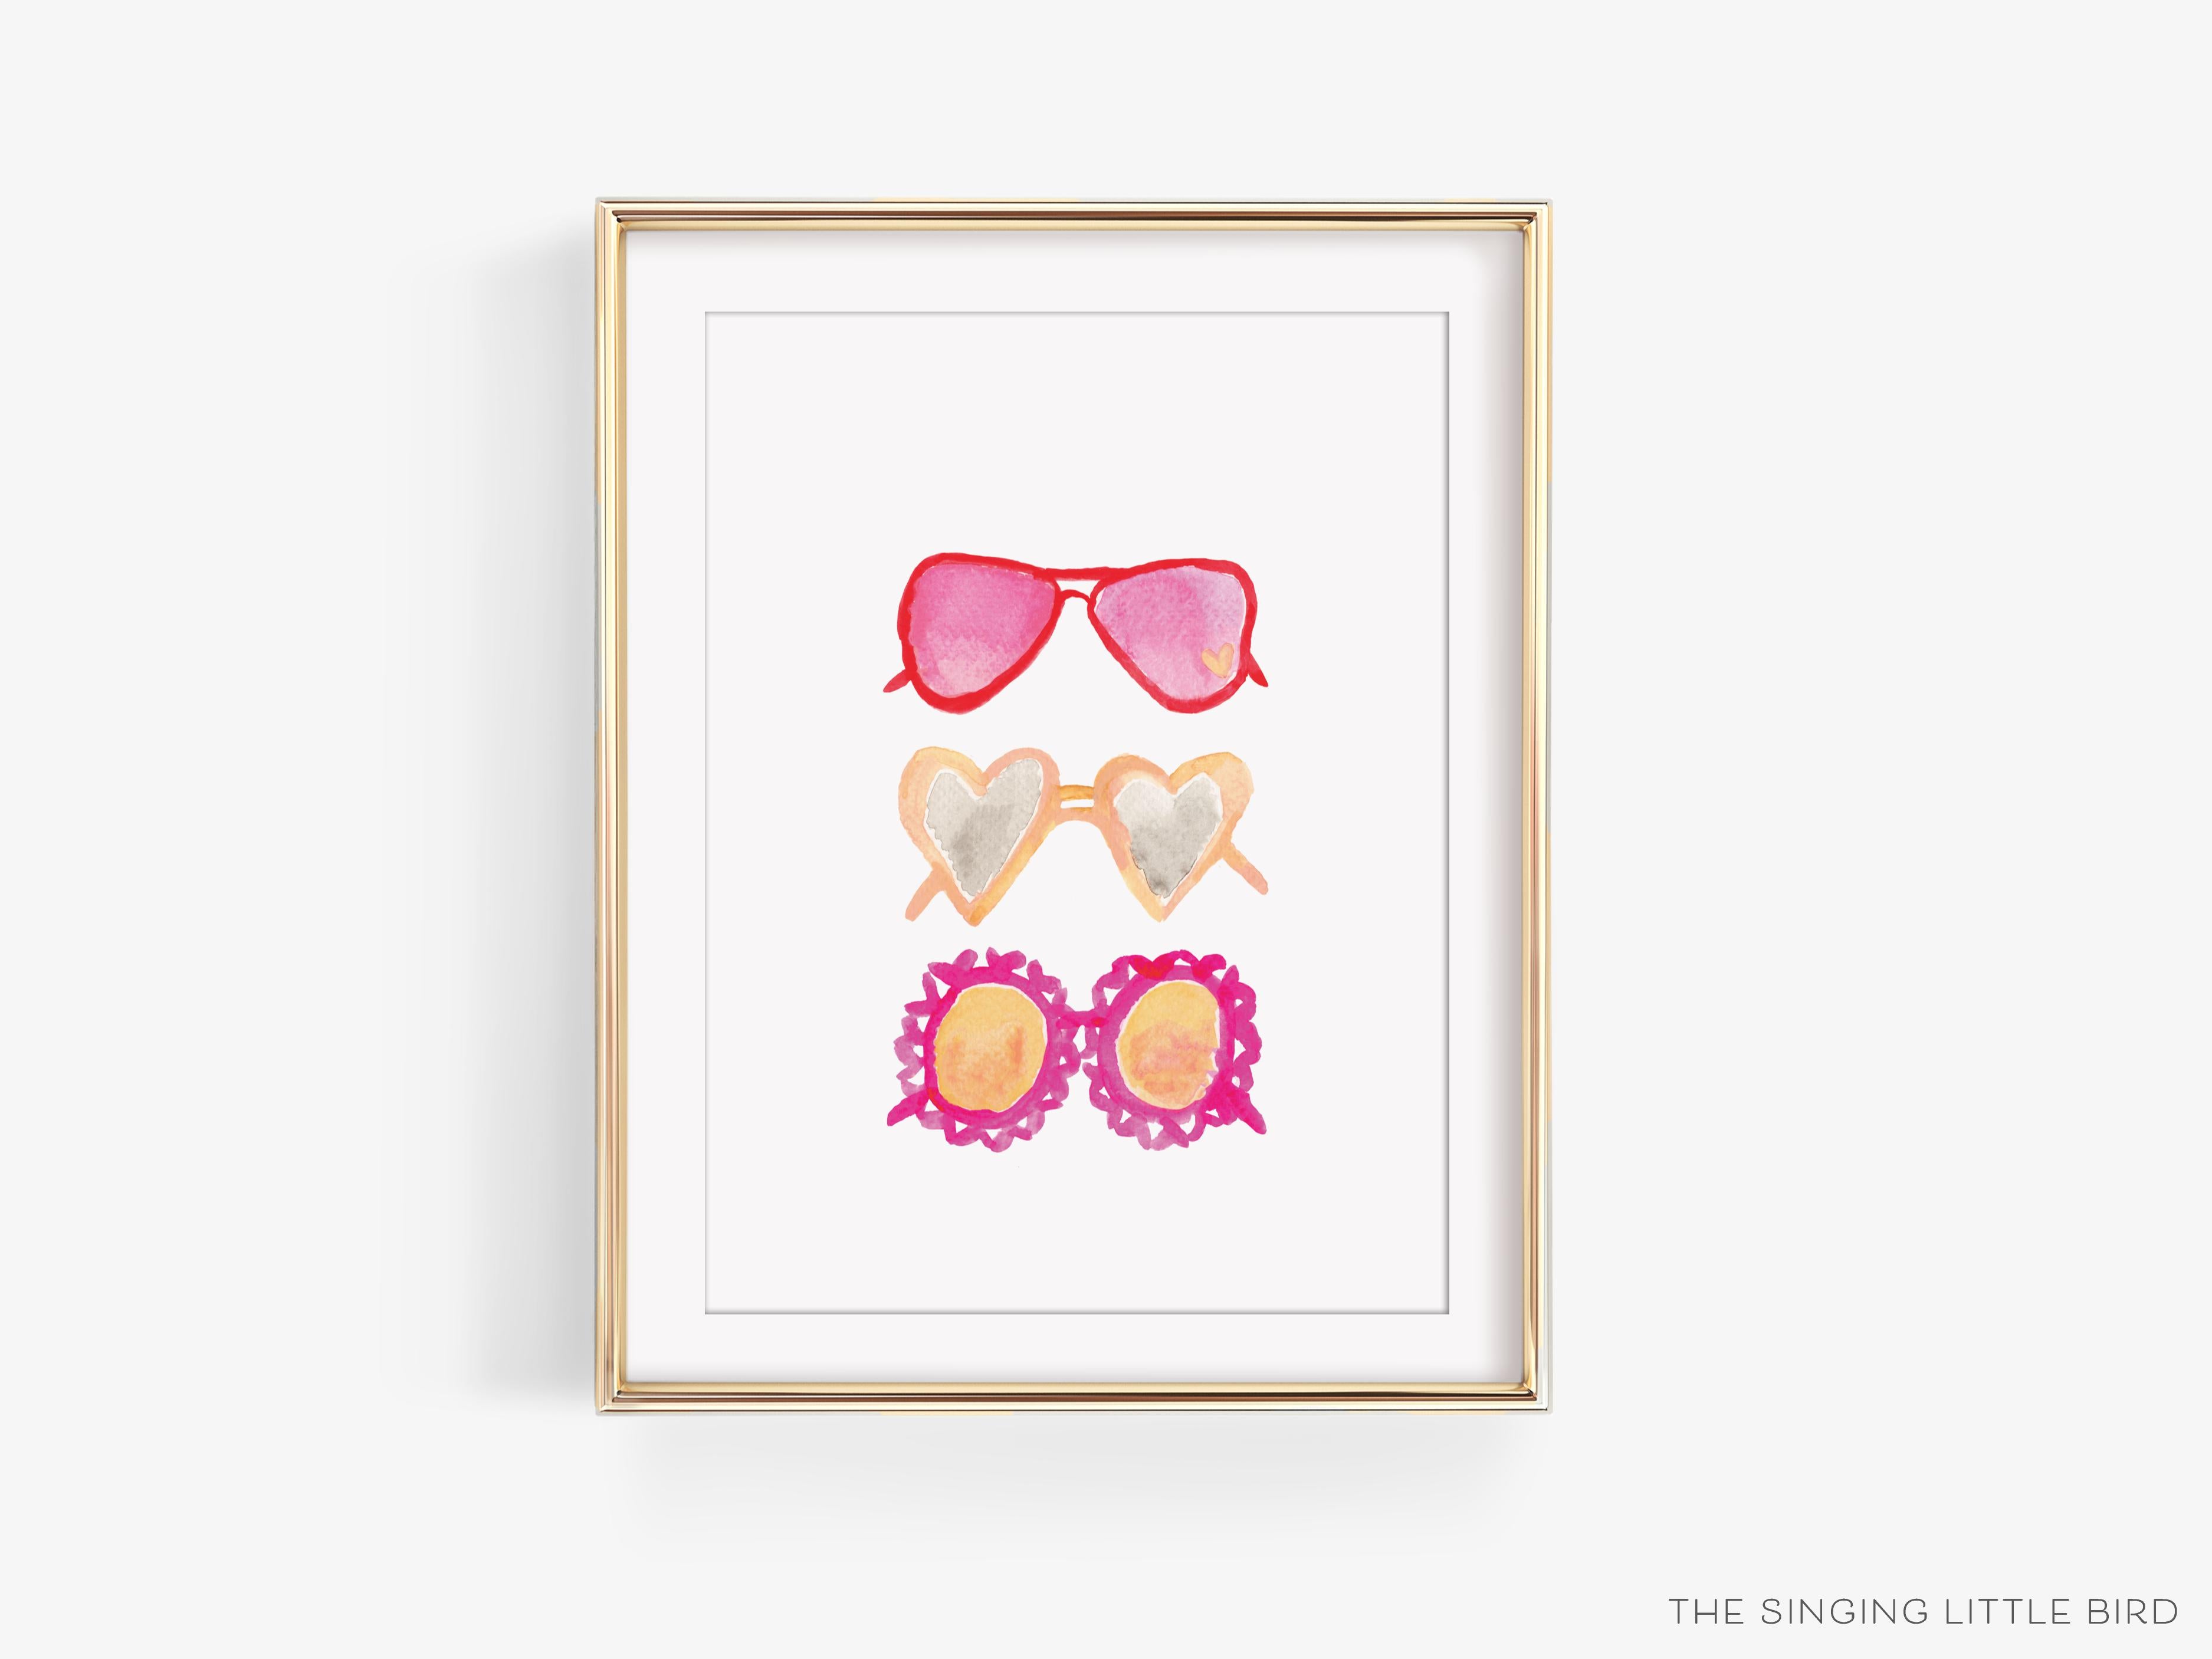 Three Heart Glasses Art Print-This watercolor art print features our hand-painted sunglasses, printed in the USA on 120lb high quality art paper. This makes a great gift or wall decor for the sunny lover in your life.-The Singing Little Bird